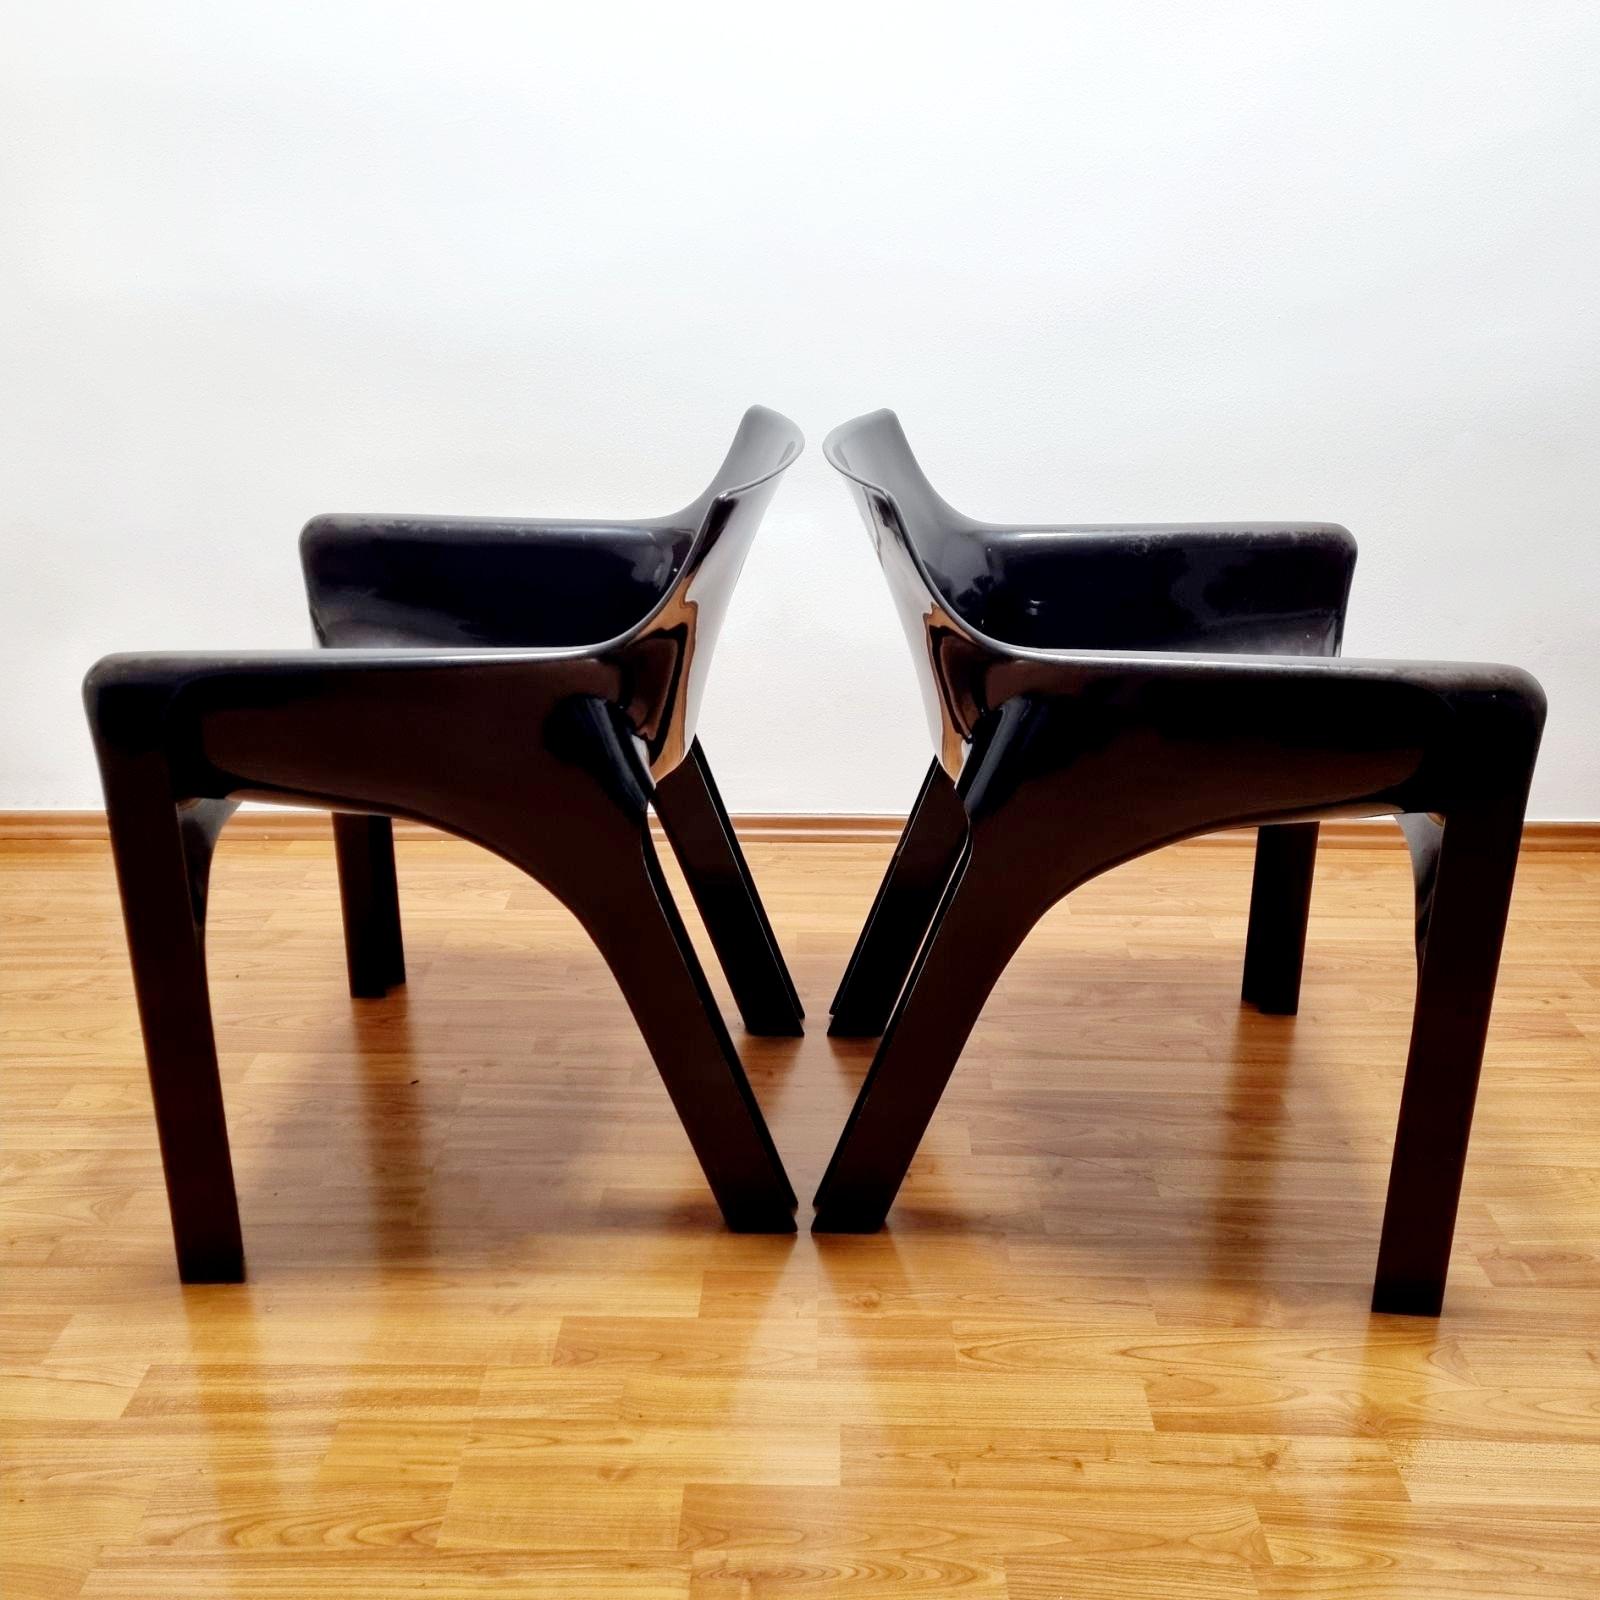 Set of 4 Italian Gaudi Chairs by Vico Magistretti for Artemide, Italy 70s For Sale 6